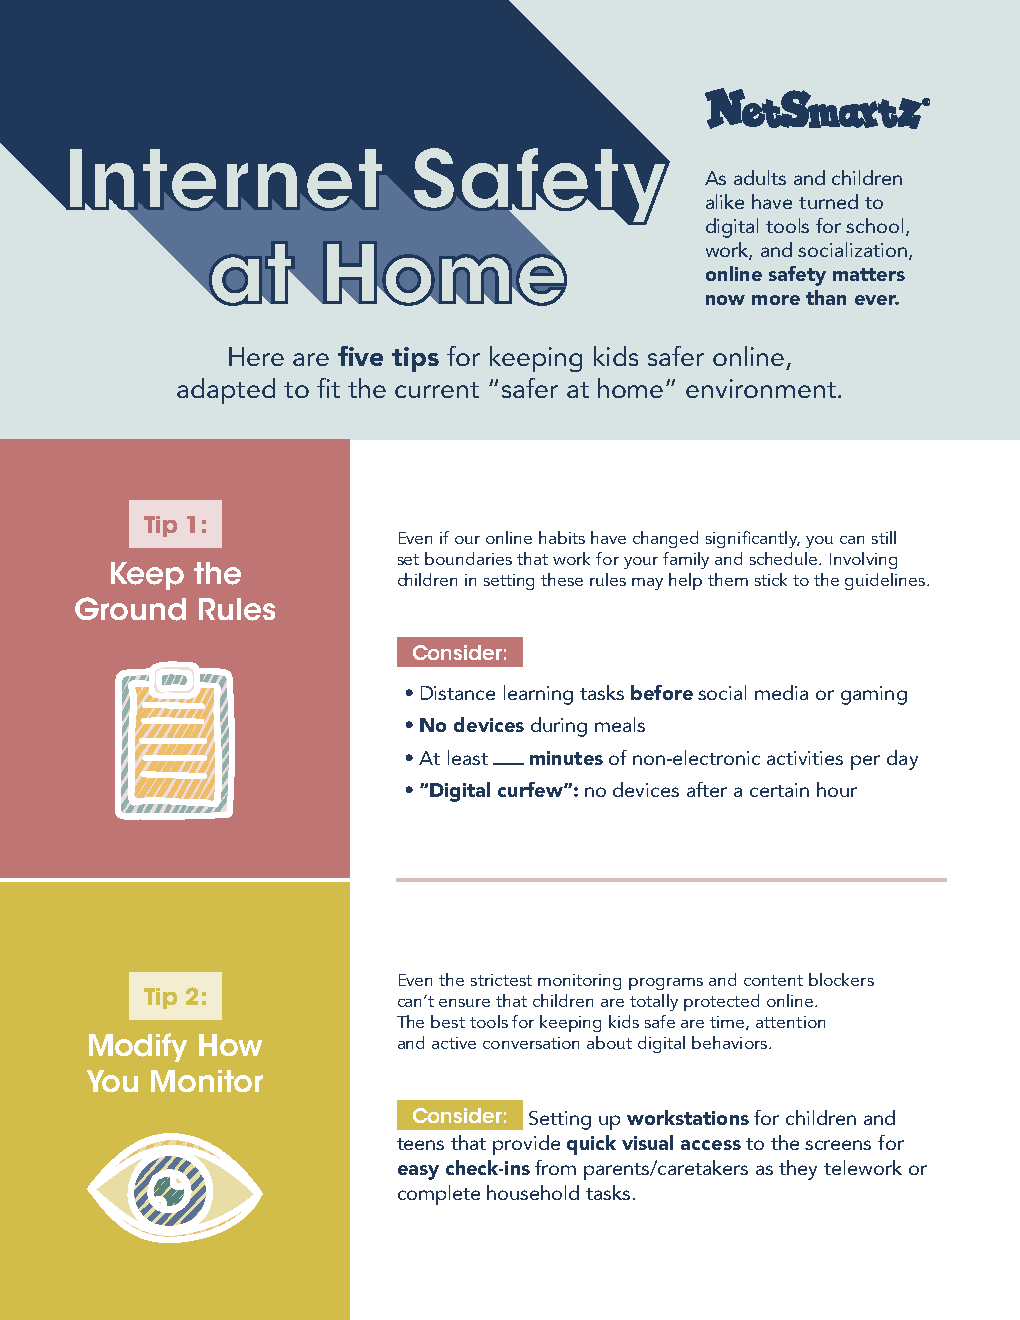 Up your online safety in just two minutes